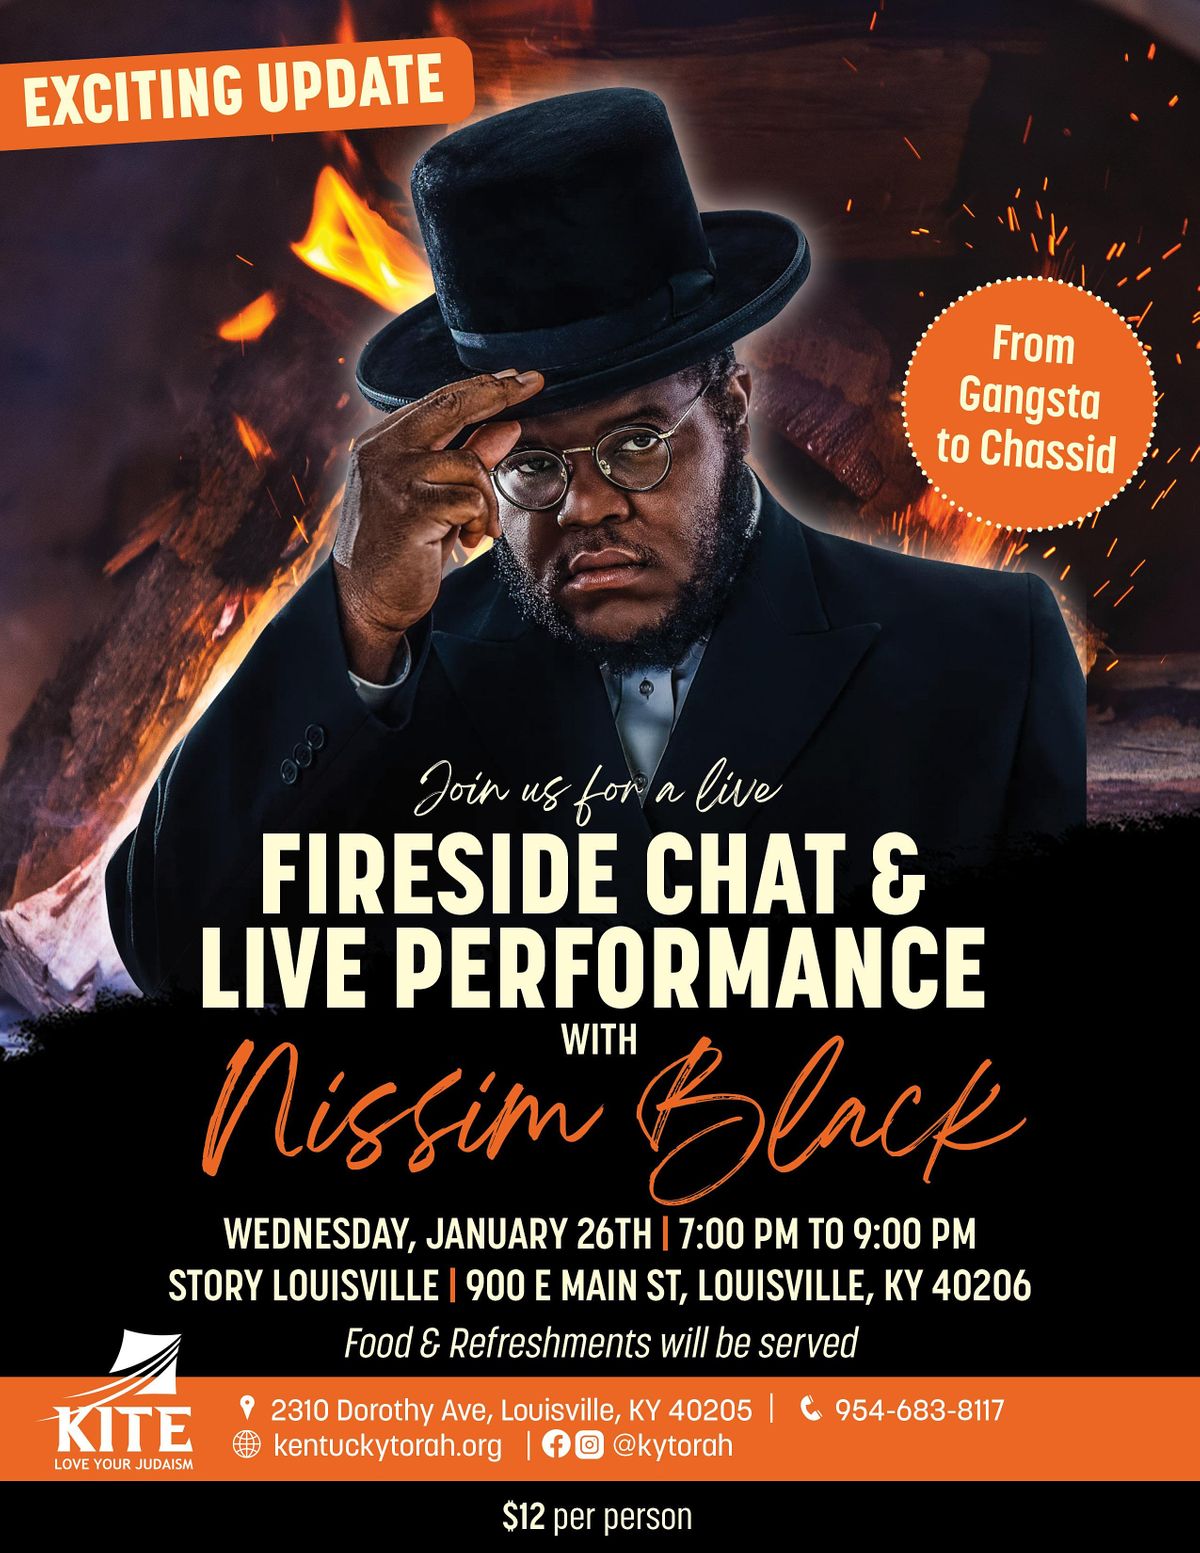 Fireside Chat And Live Performance With Nissim Black Story Louisville January 26 22